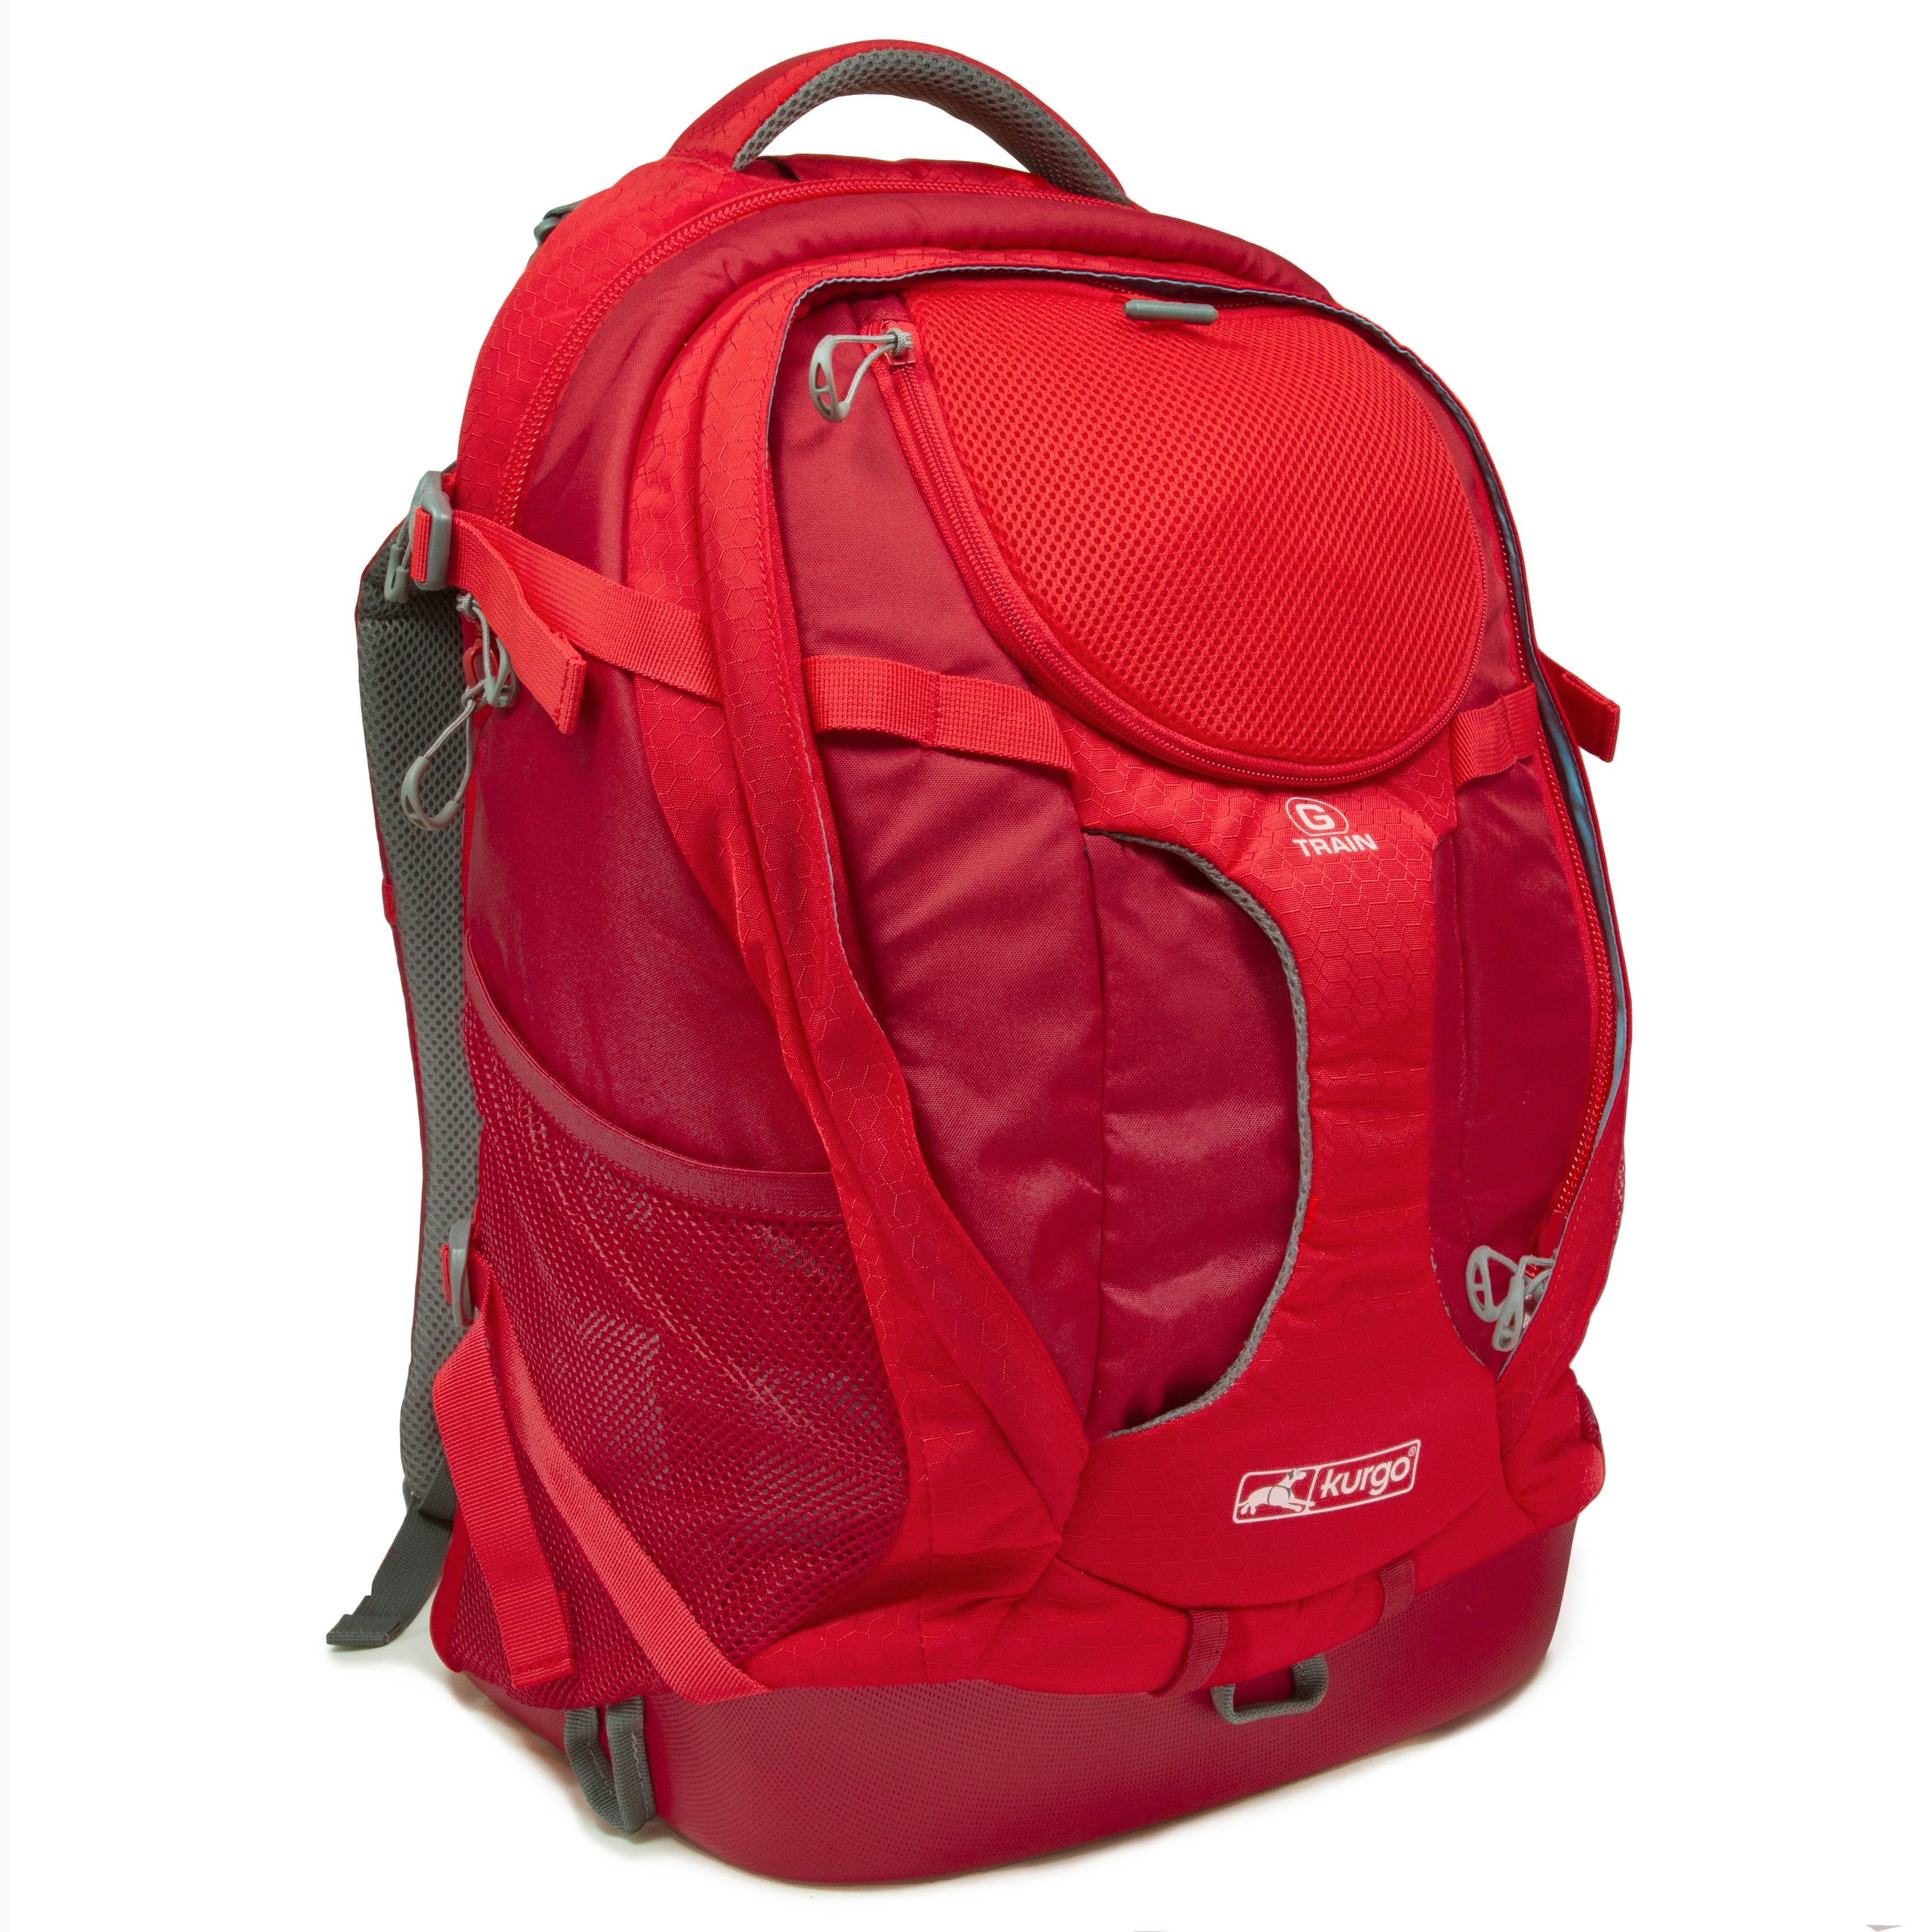 G-Train K9 Backpack Dog Carrier Chili Red